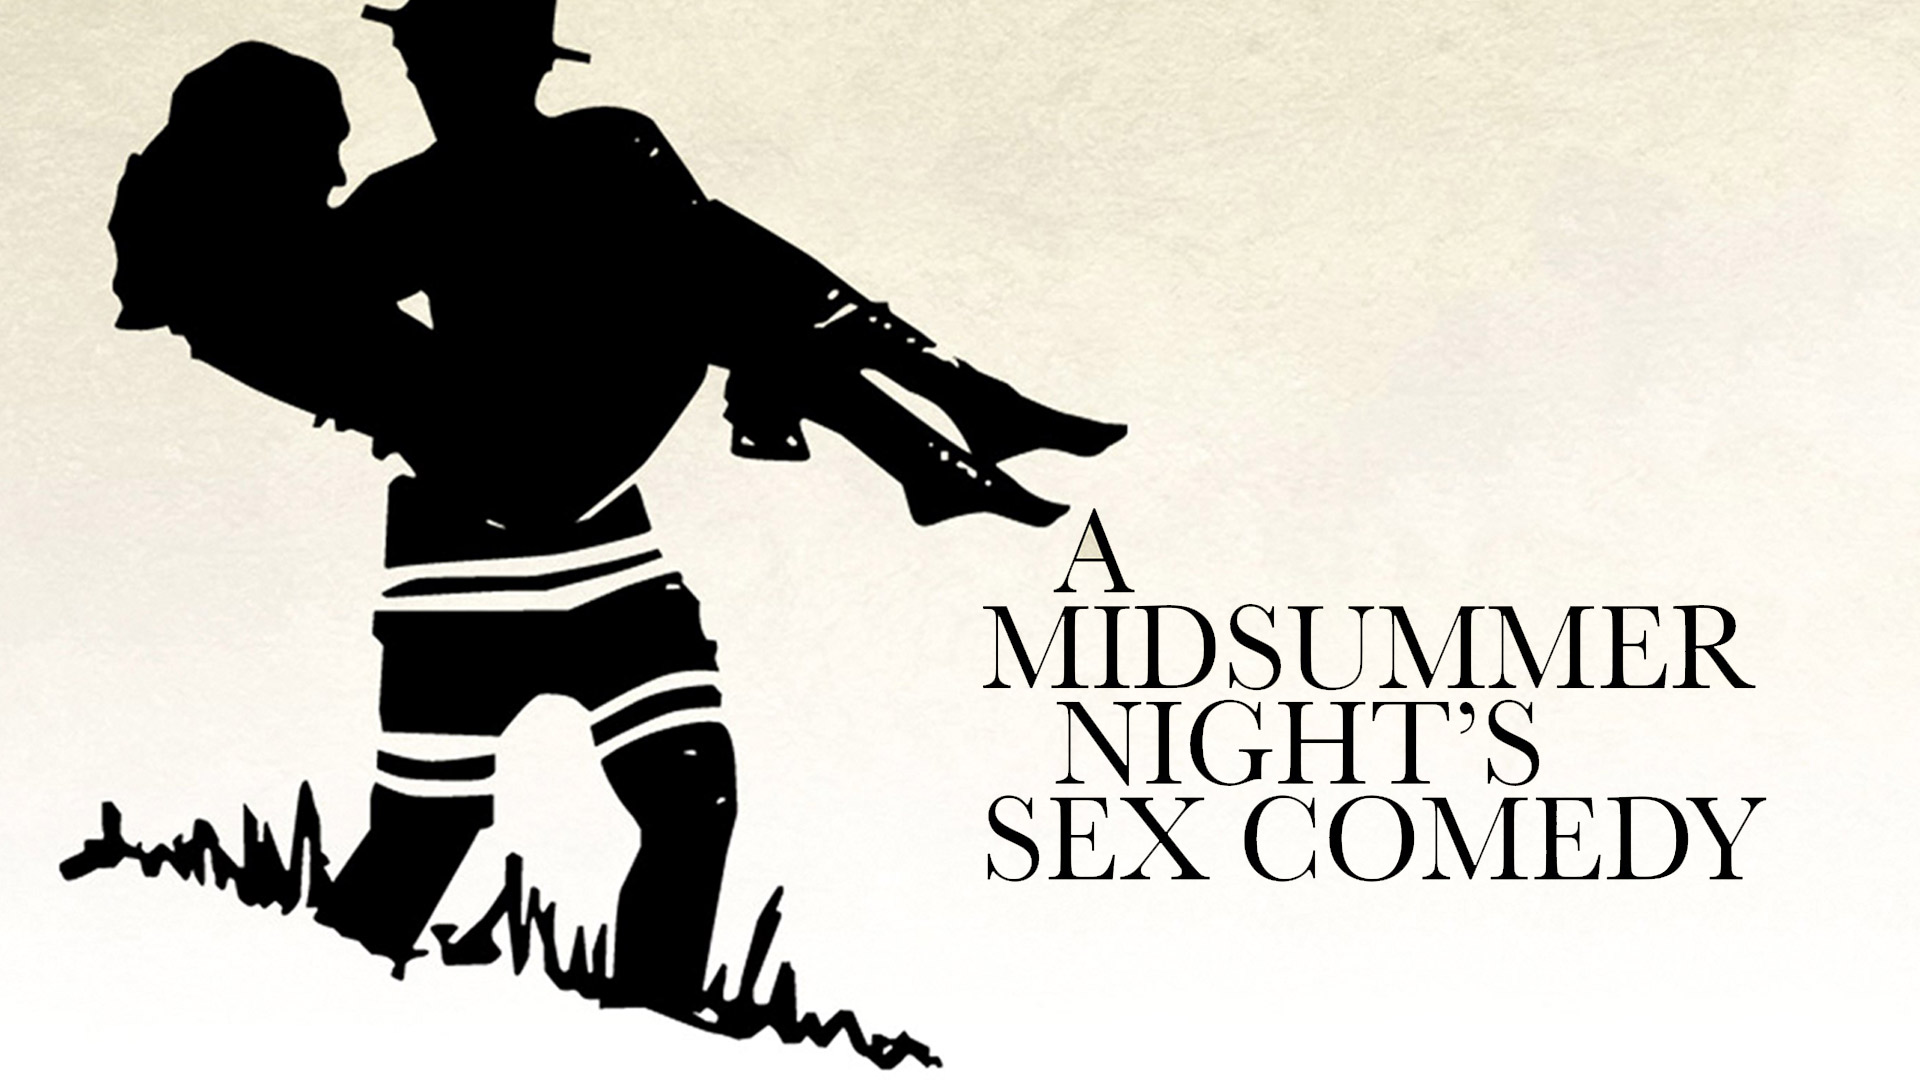 41-facts-about-the-movie-a-midsummer-nights-sex-comedy